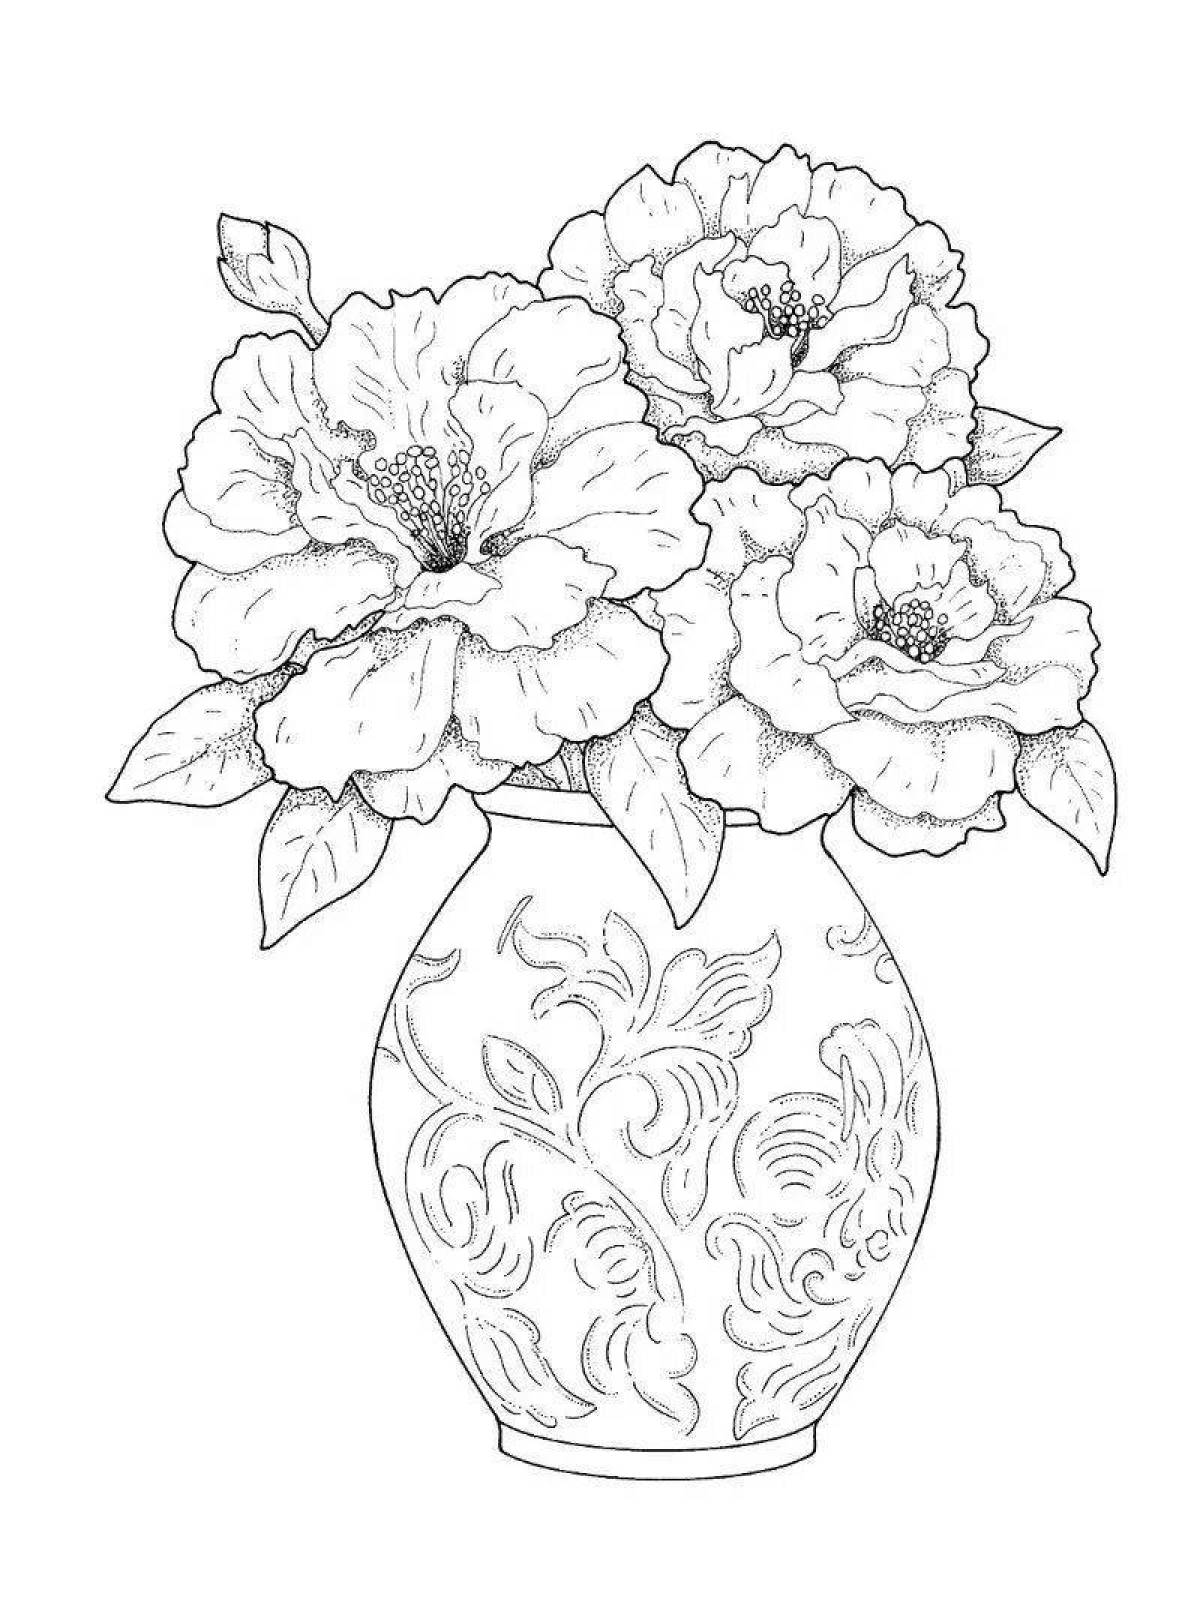 Coloring big flowers in a vase by luck